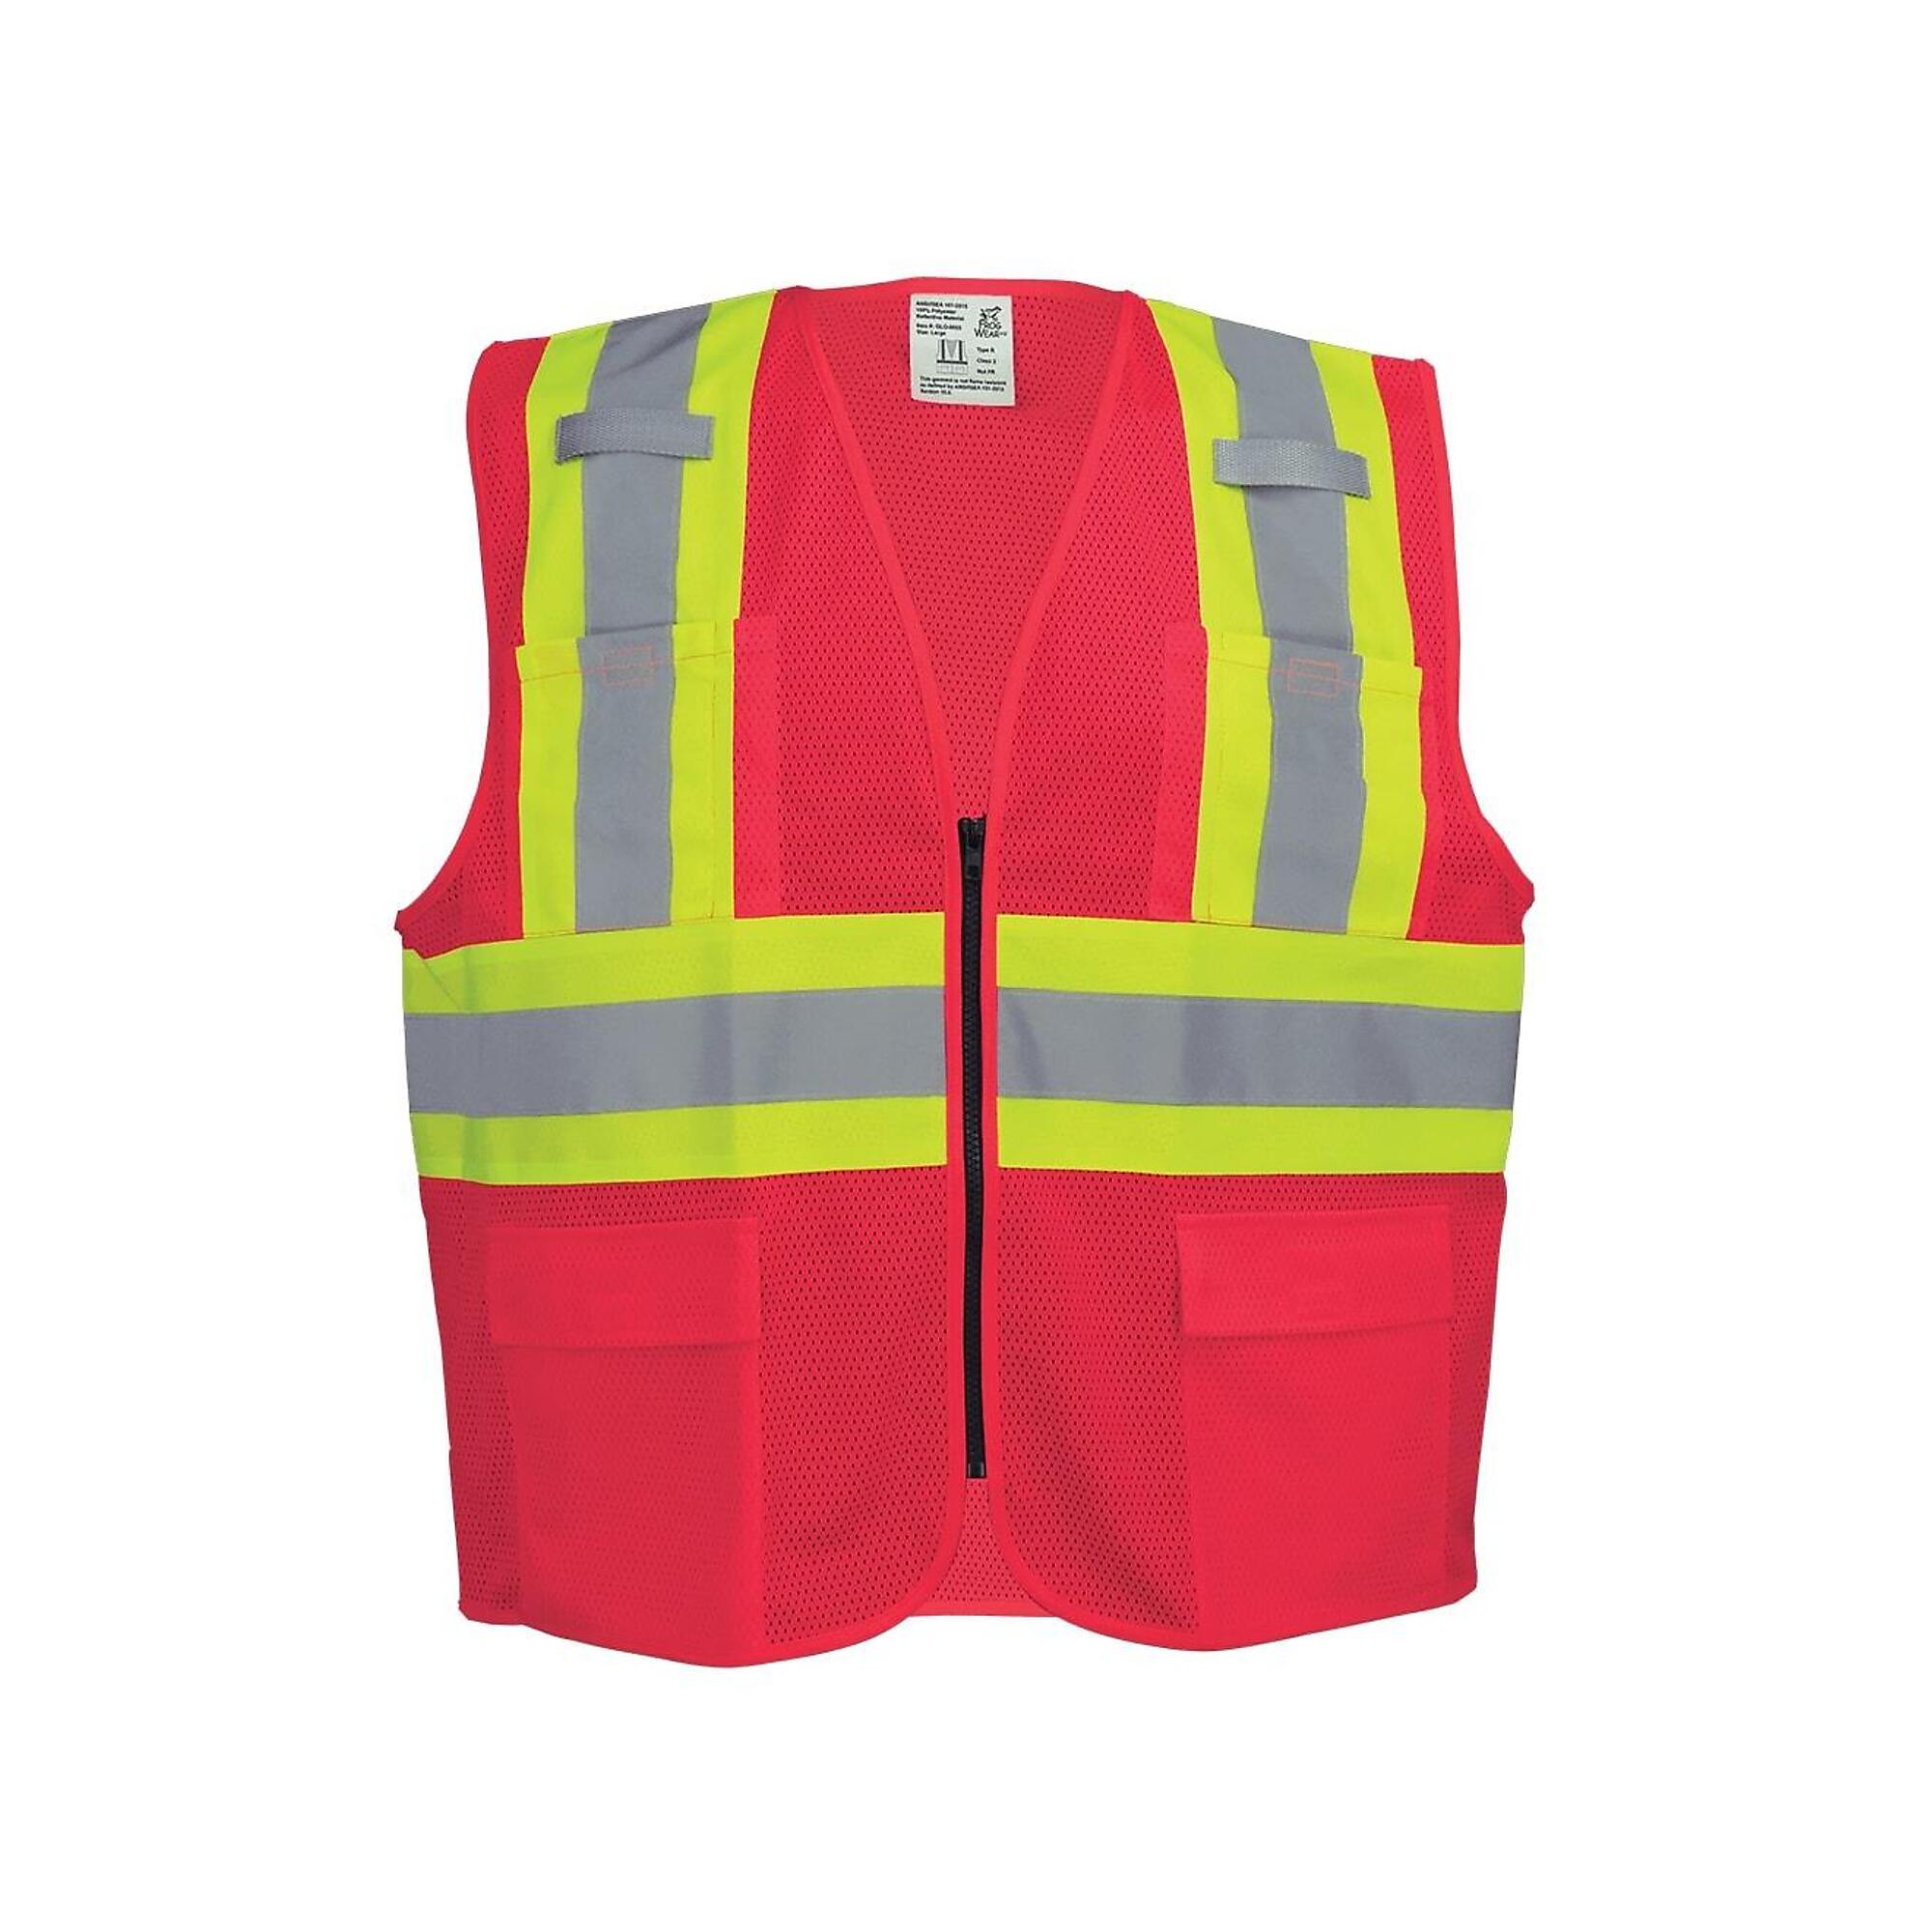 FrogWear, HV Red, Class 2 6 Pockets, Mesh Vest, Size 2XL, Color High-Visibility Red, Model GLO-0055-2XL